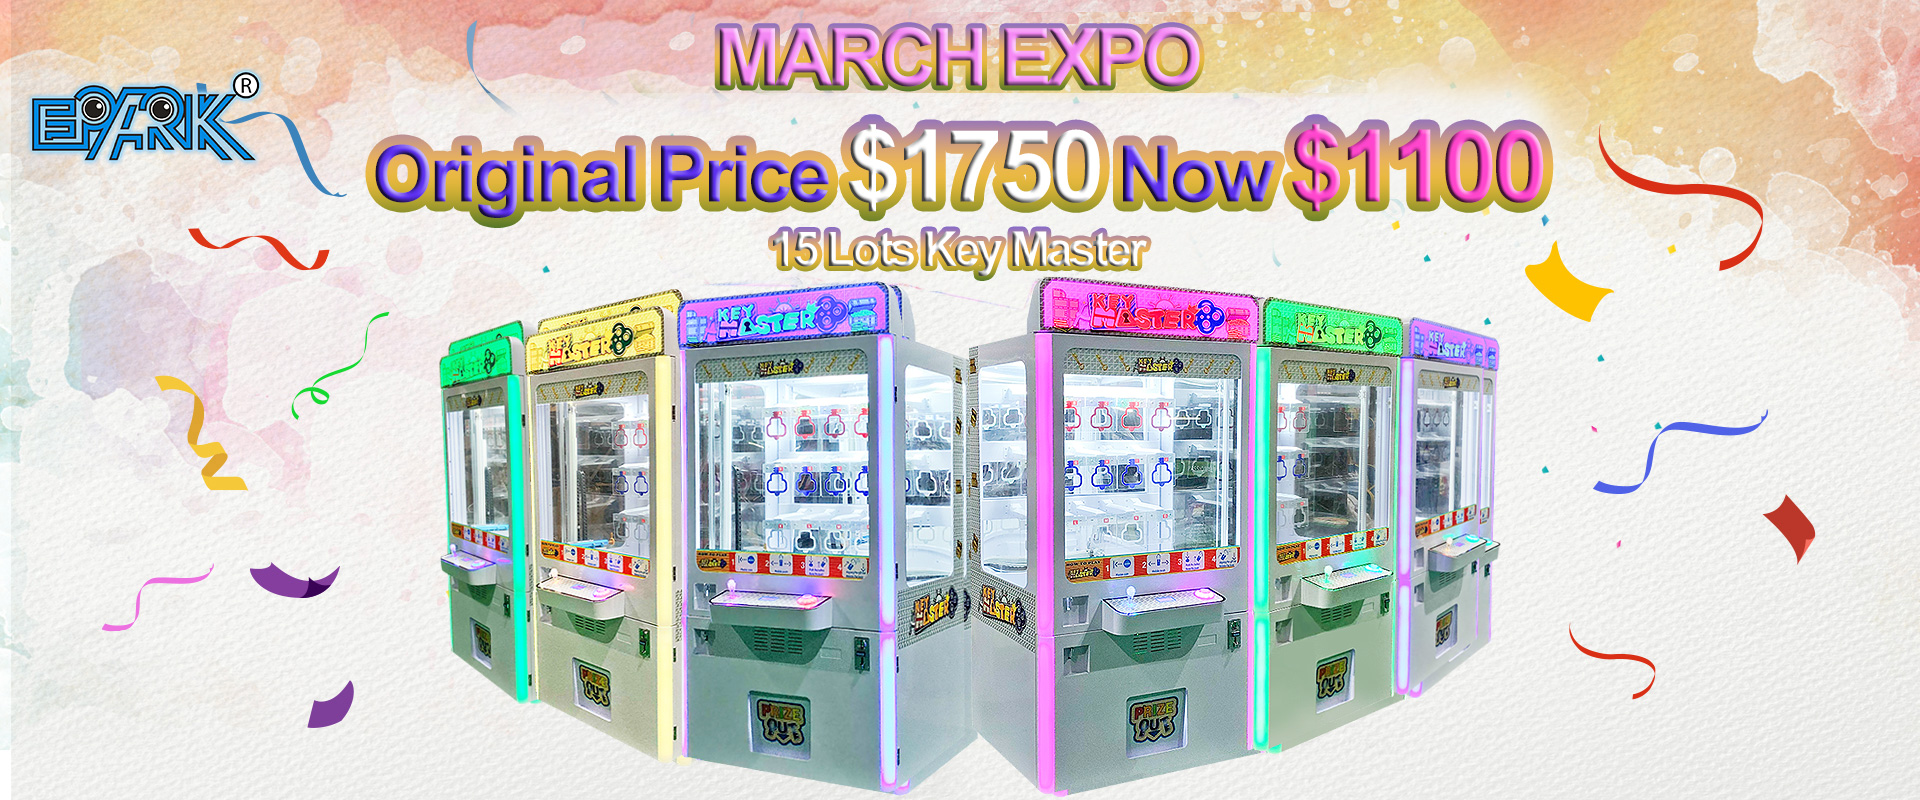 EPARK MARCH EXPO Promotion